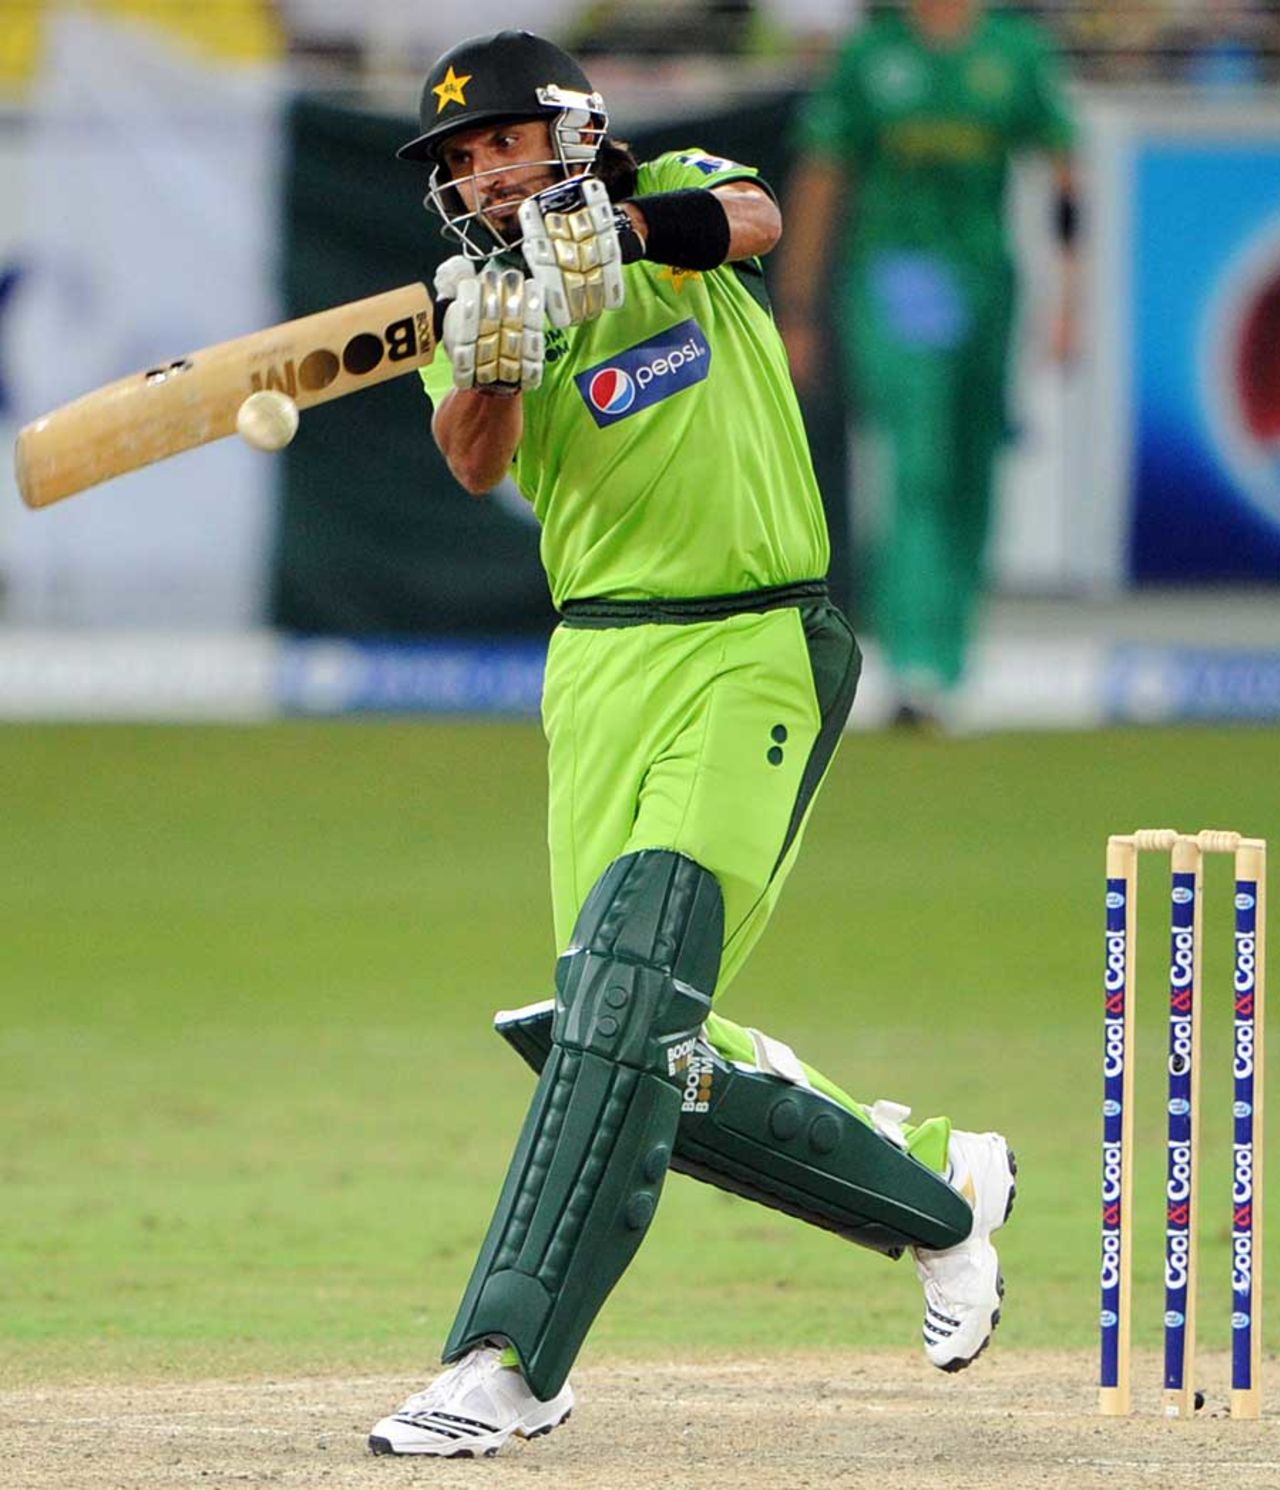 Shahid Afridi was typically aggressive but again gave his innings away, Pakistan v South Africa, 4th ODI, Dubai, November 5, 2010